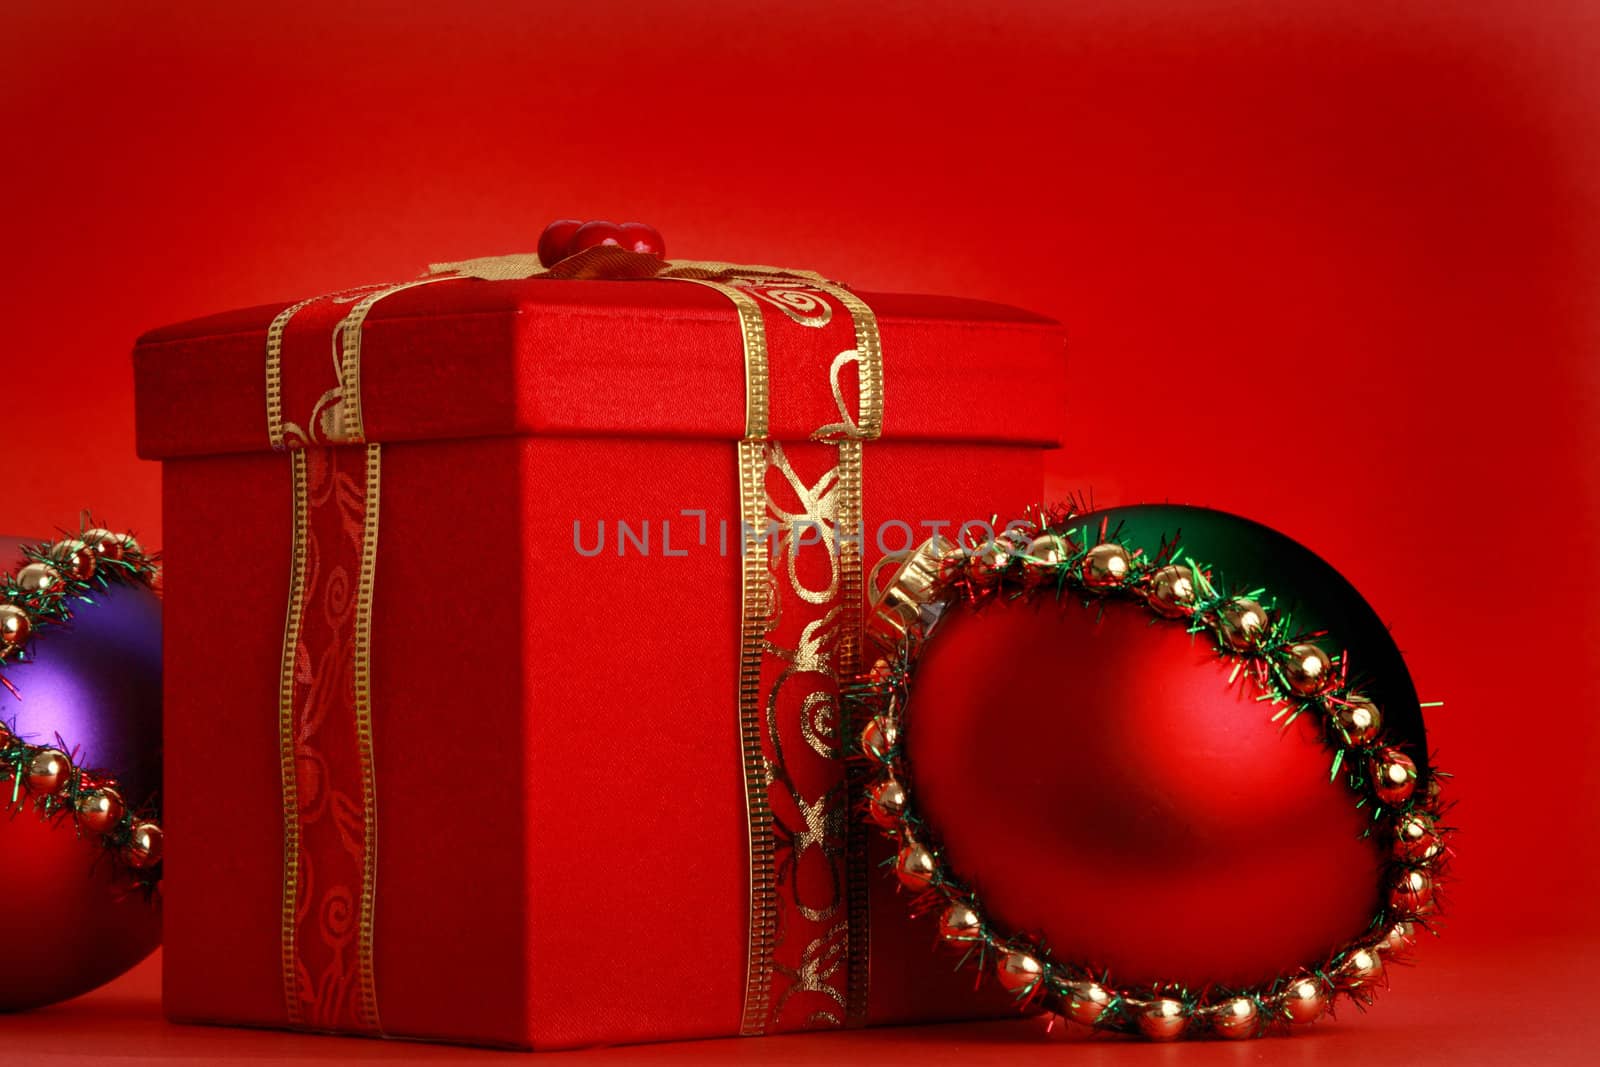 christmas gift box, red background